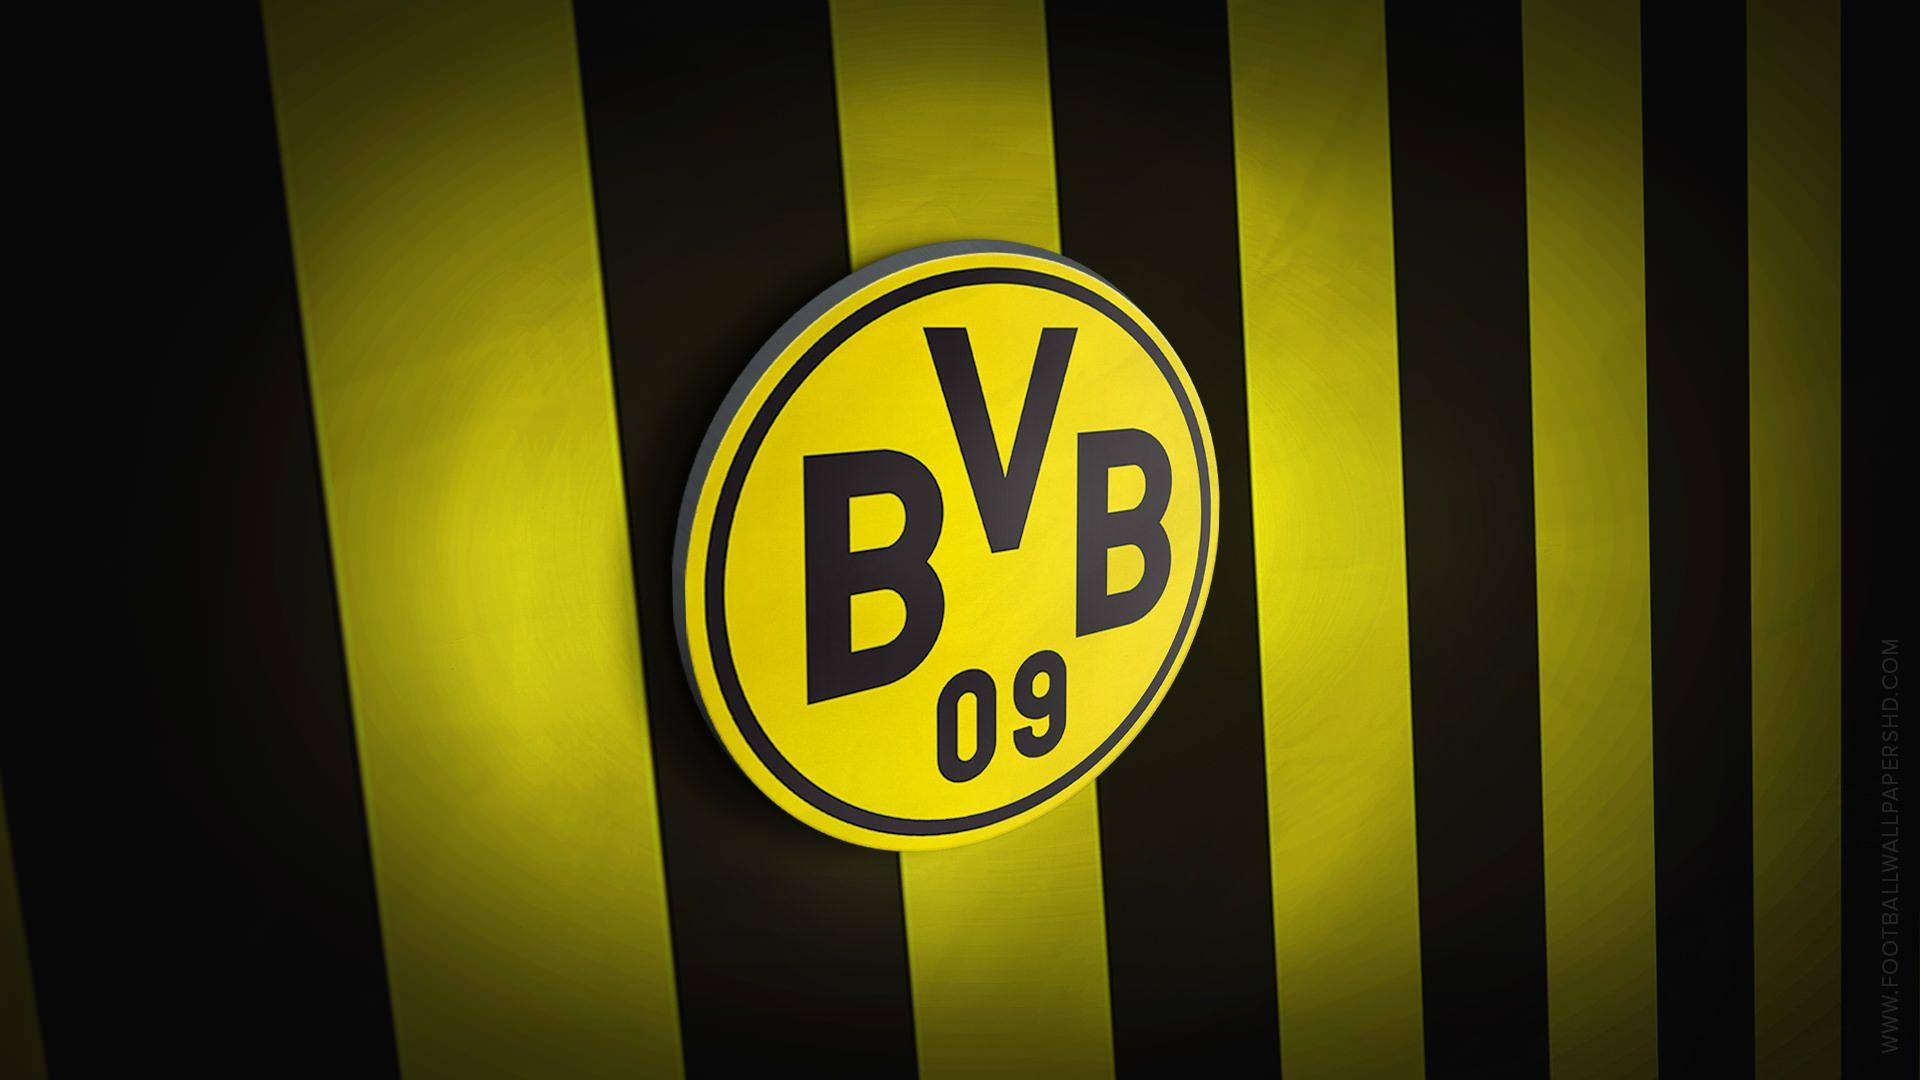 Download Bvb wallpaper to your cell phone borussia bvb dortmund